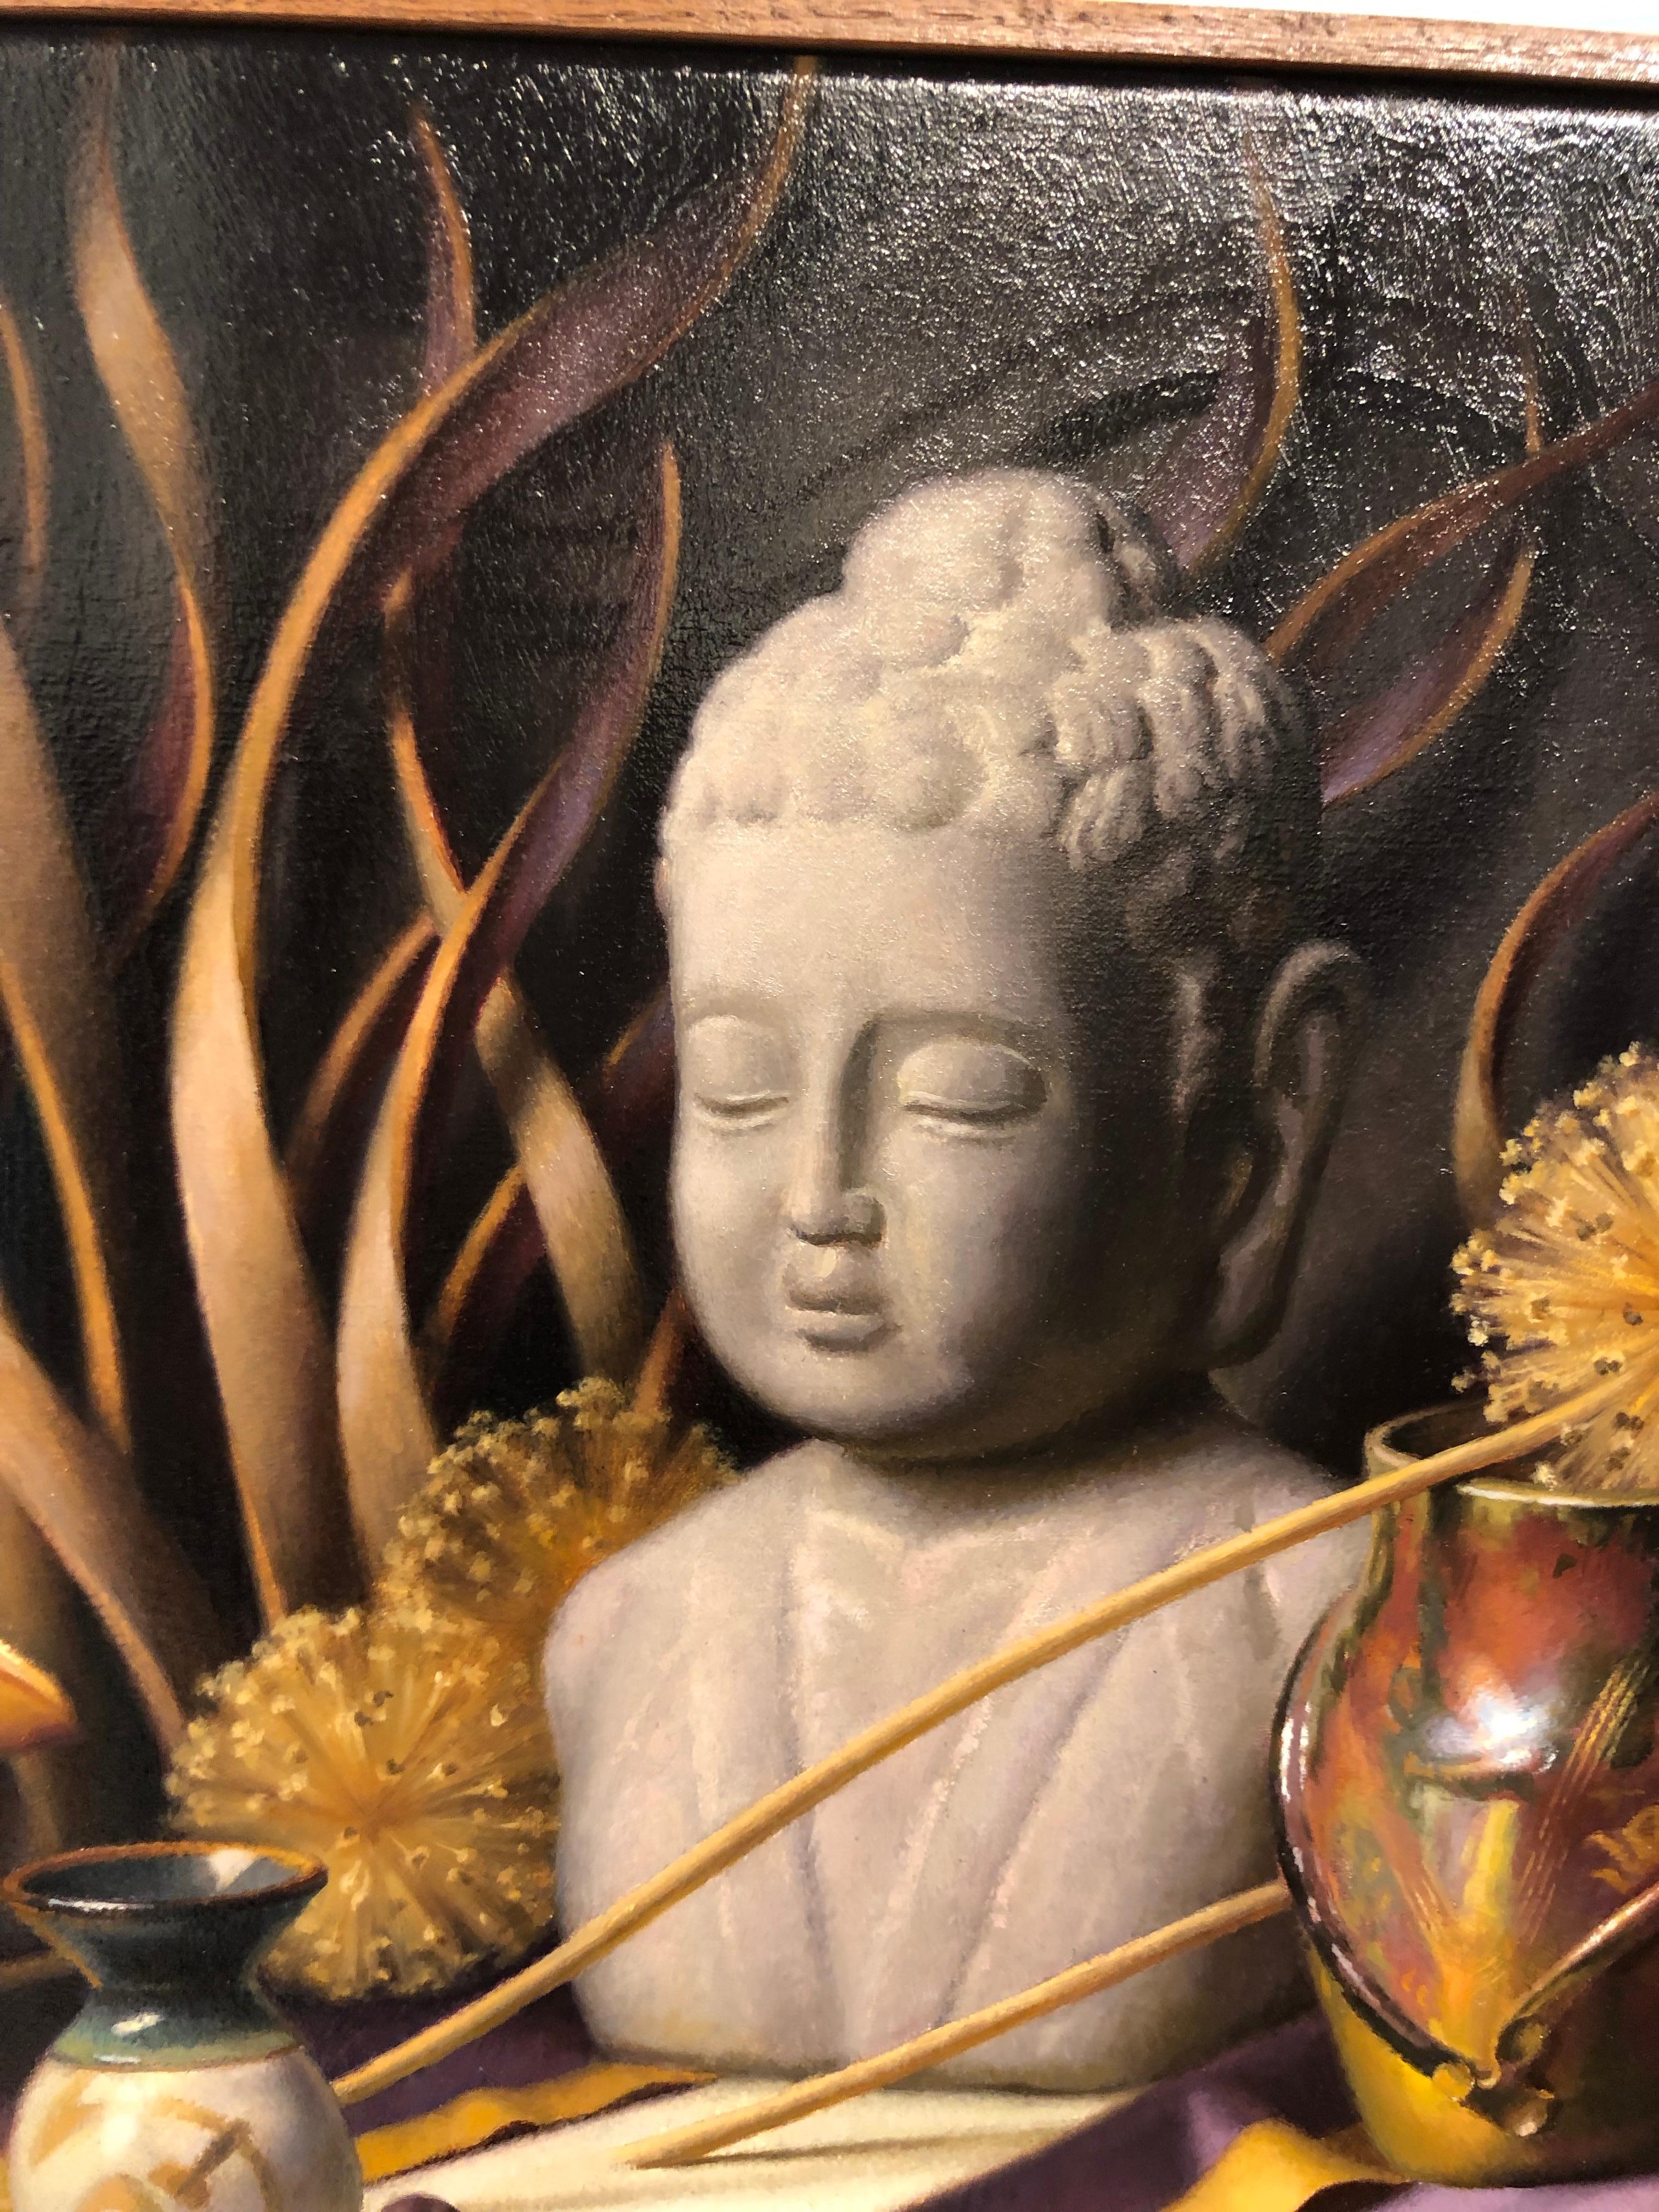 Hand-Painted Still Life with Buddha, Original Oil Painting on Canvas by Michael Chelich